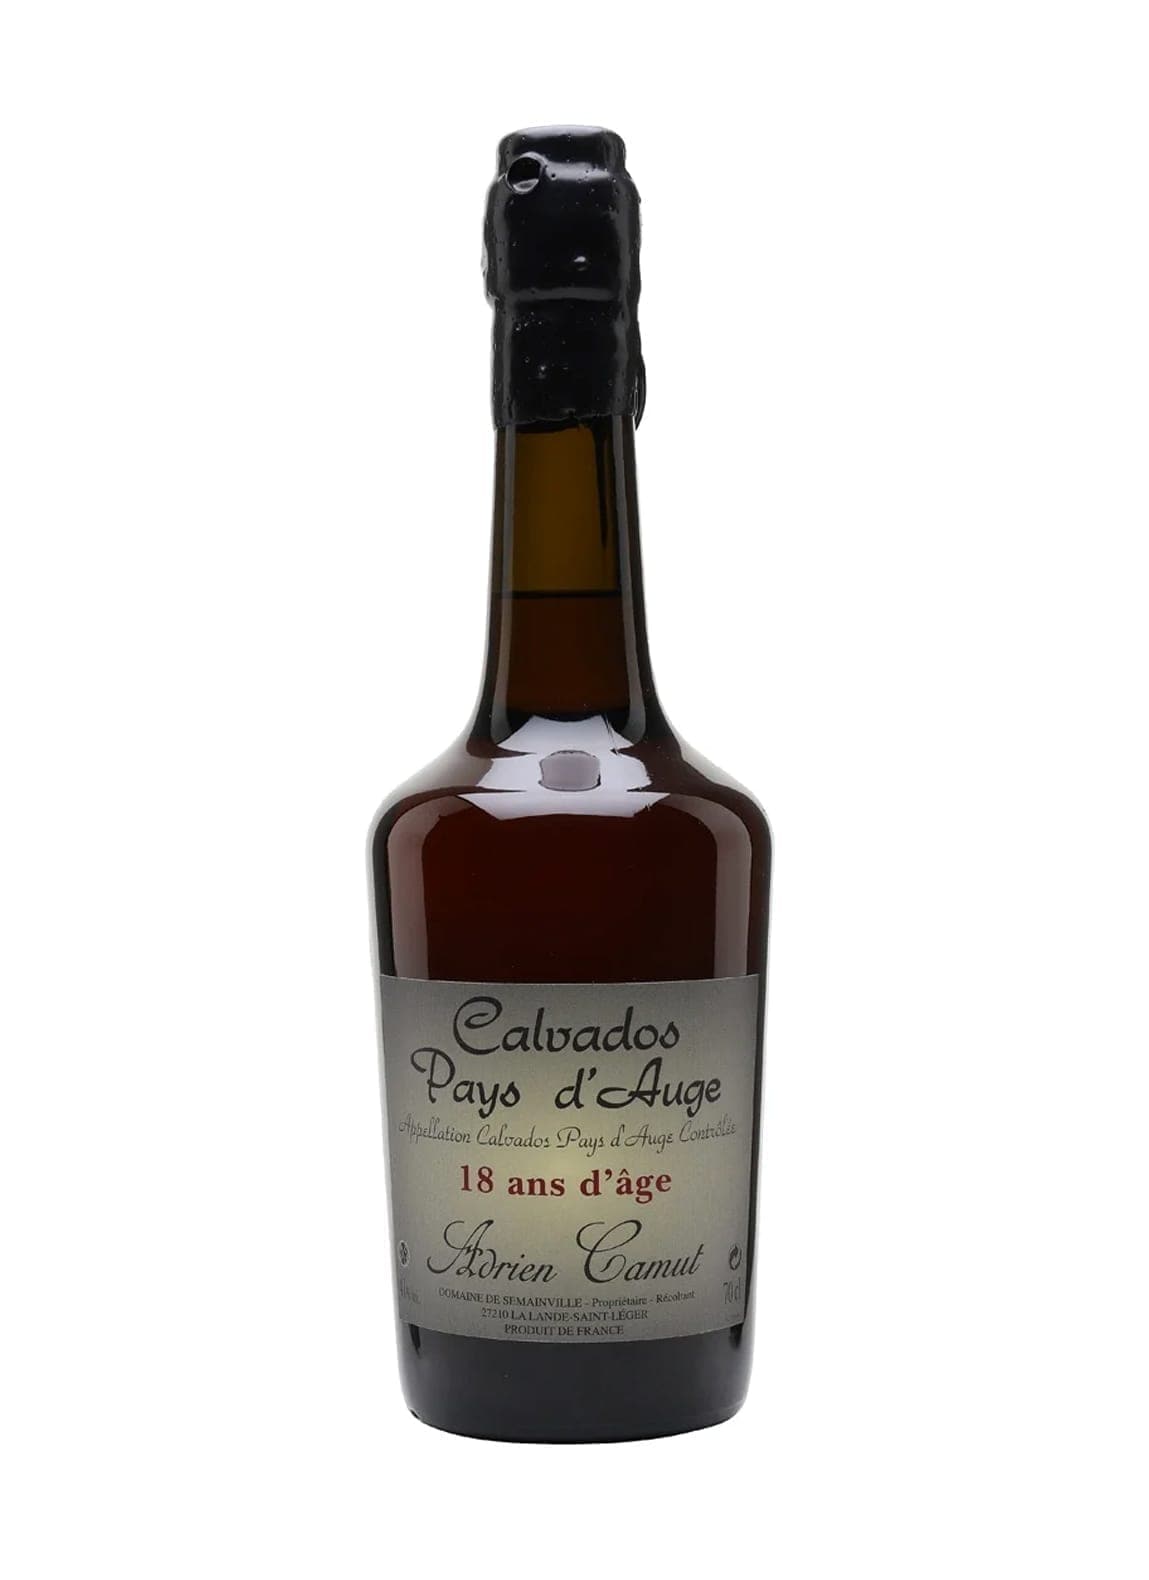 Adrien Camut Pays D'auge Calvados Privilege 18 years 40% 700ml | Brandy | Shop online at Spirits of France